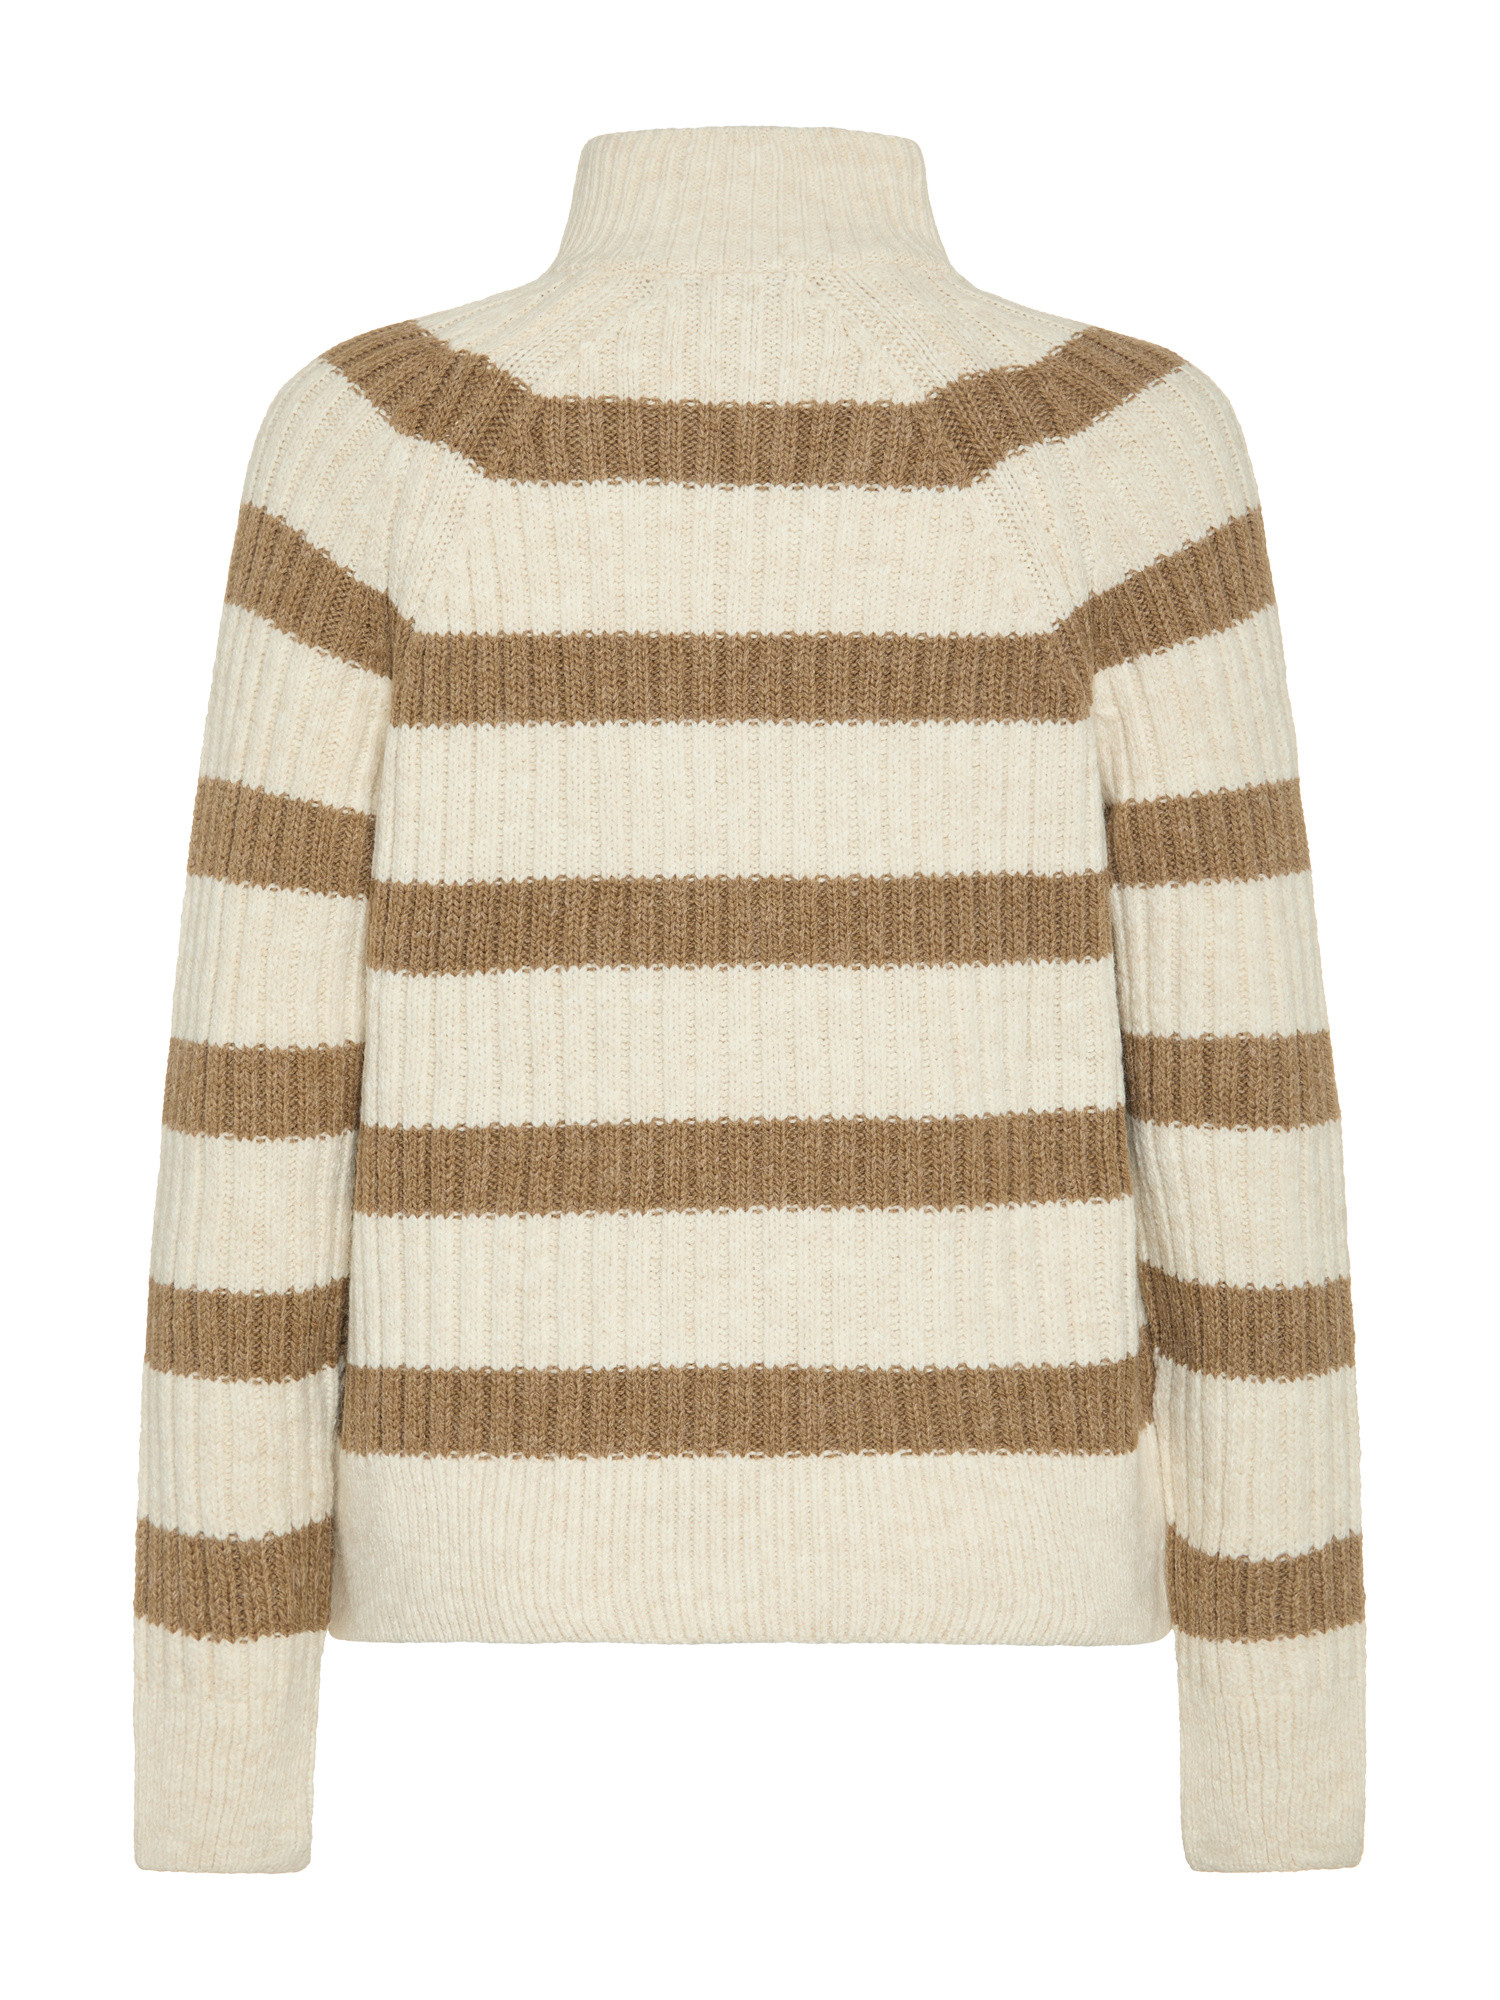 Only - Pullover mezza zip a righe, Beige, large image number 1